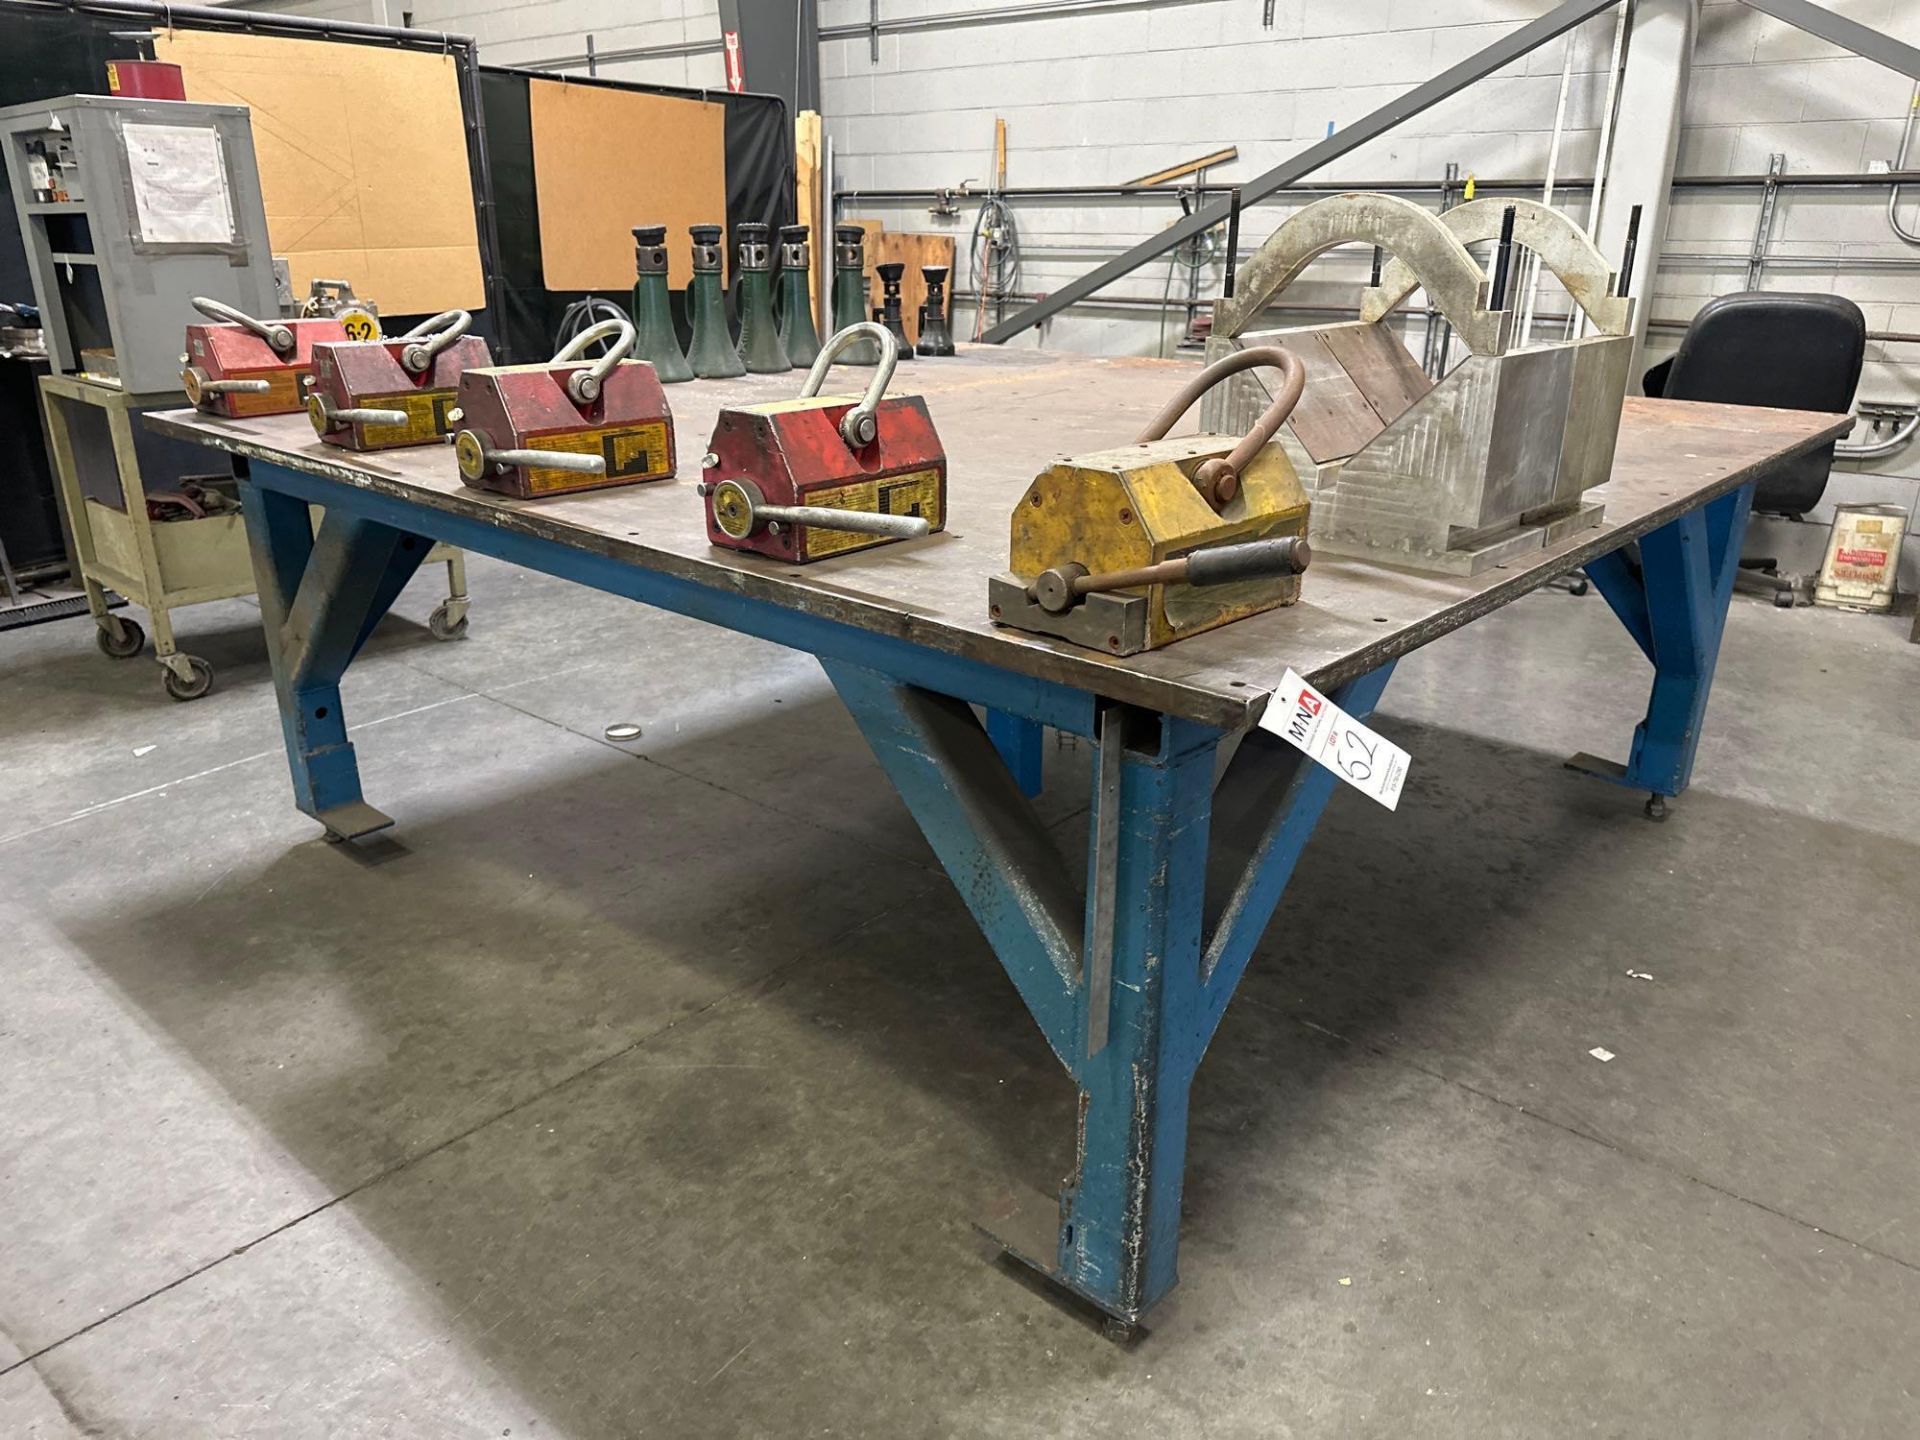 96”L x 99”W x 36”H Steel Welding Table *CONTENTS NOT INCLUDED. TABLE ONLY*